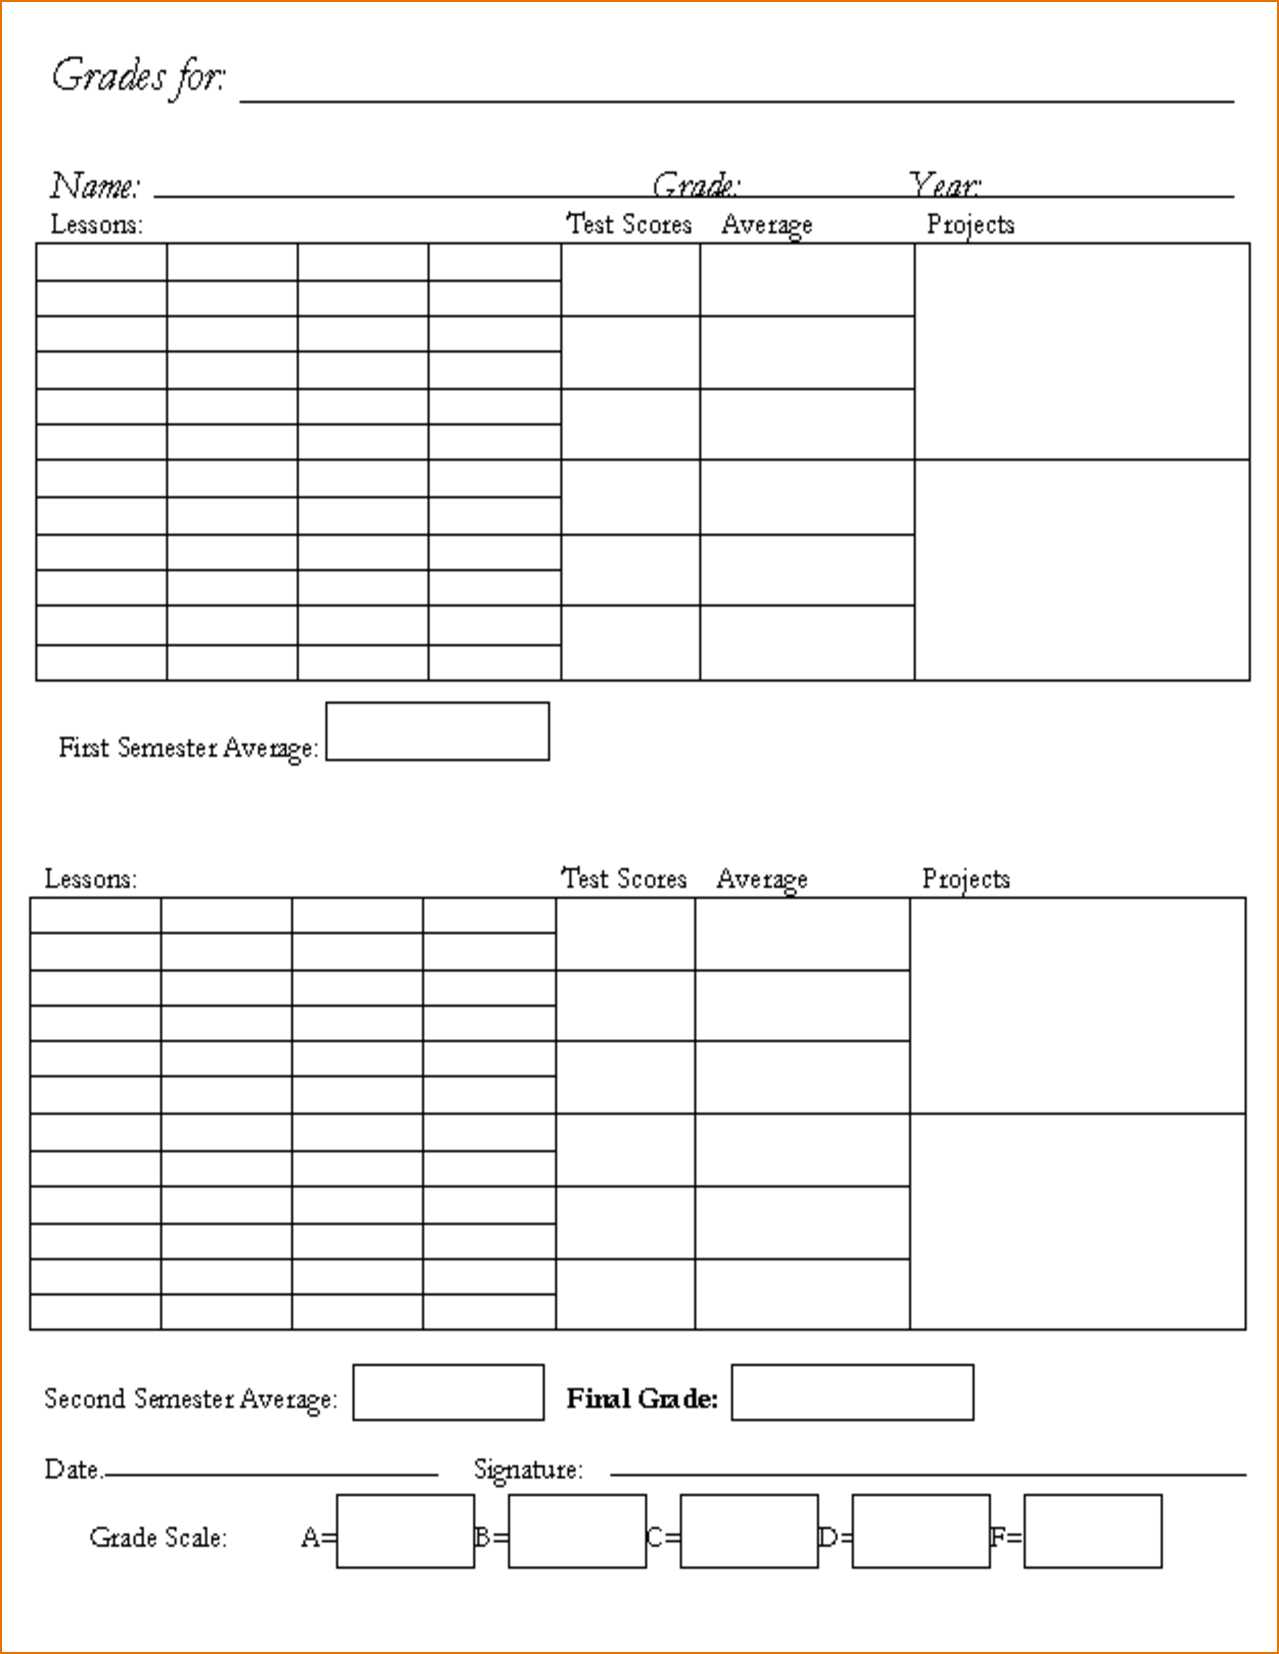 Name Card Template For Kindergarten Throughout Boyfriend In Kindergarten Report Card Template